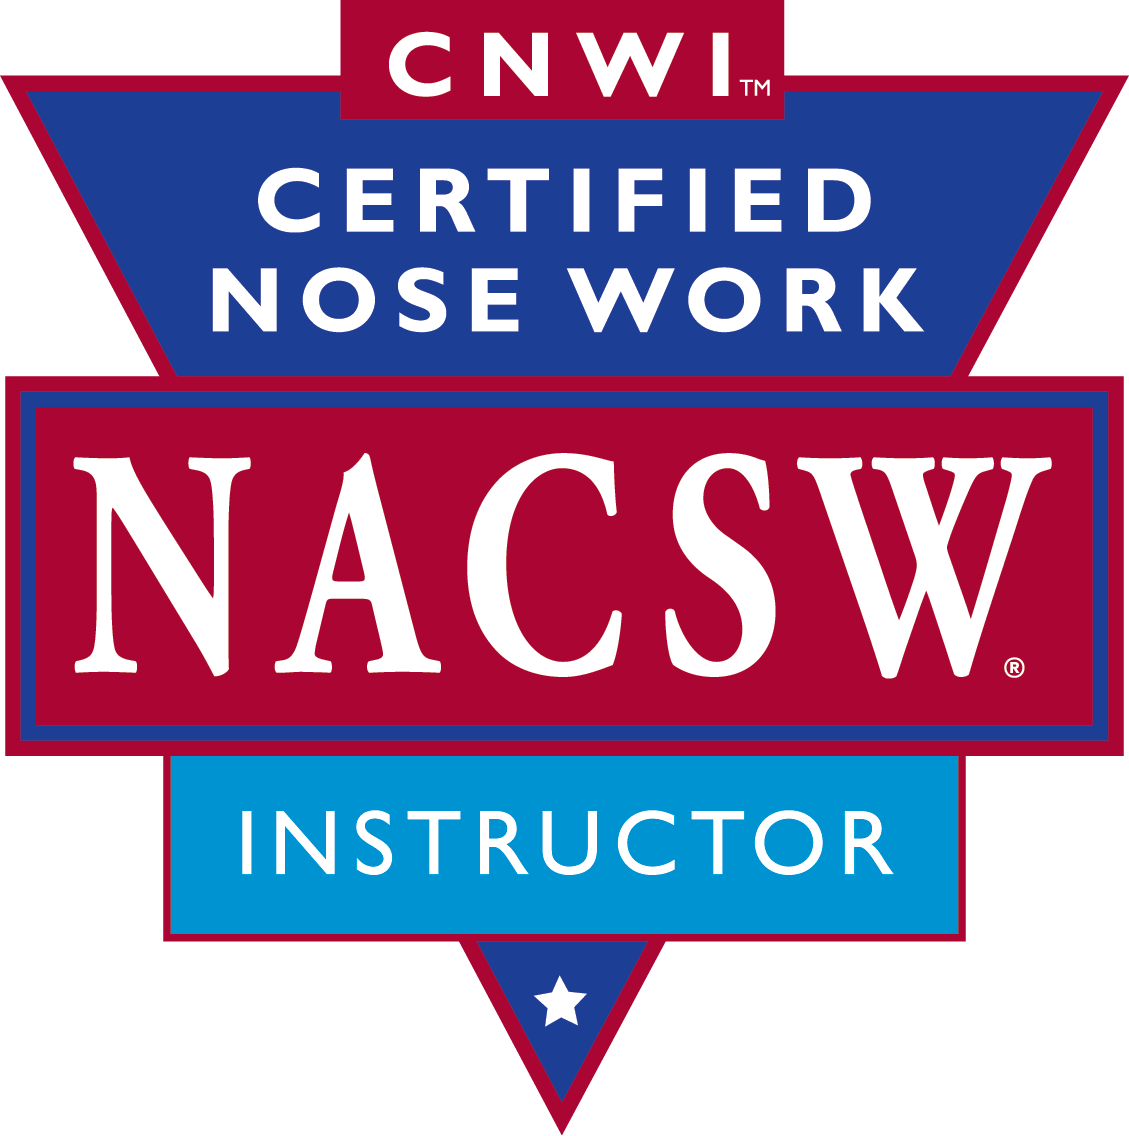 Instructor (CNWI℠) Extension Fee – $75